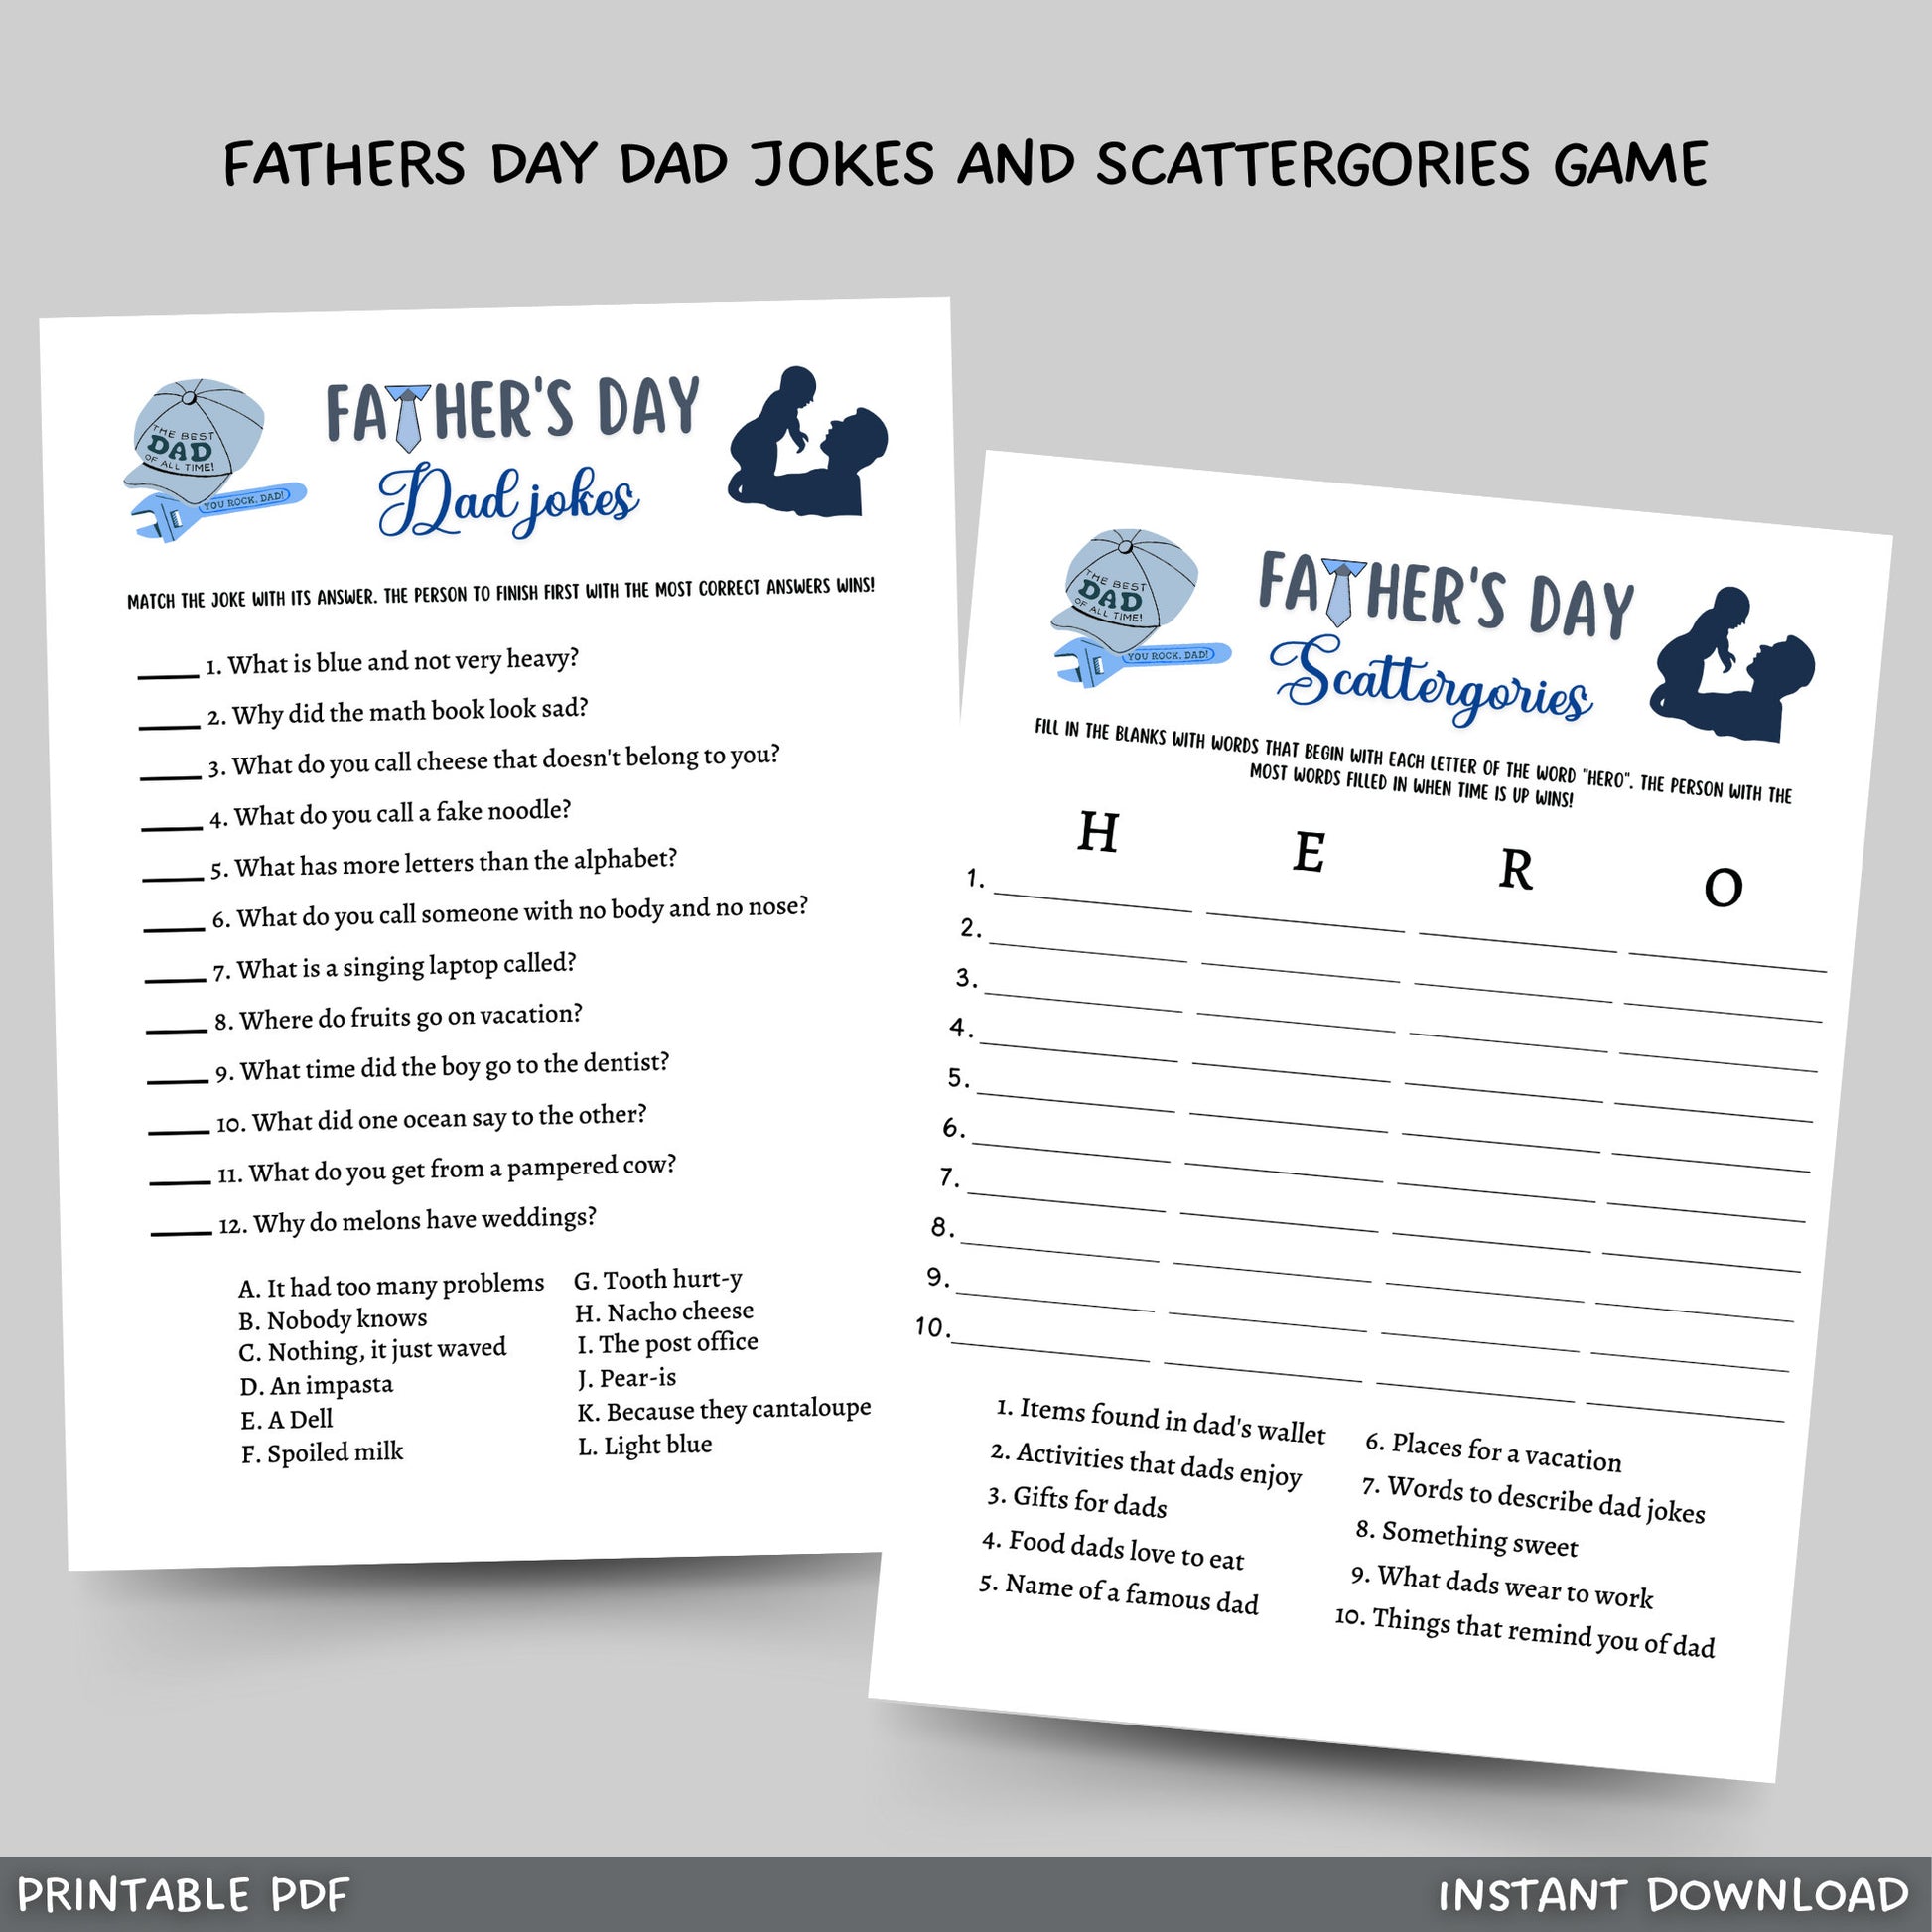 This 2 Pack of Fathers Day Dad jokes and Scattergories games bundle is a printable PDF and instant digital download! It is a great party game idea to play with your friends and family. It is sure to impress your guests and works for adults and kids!